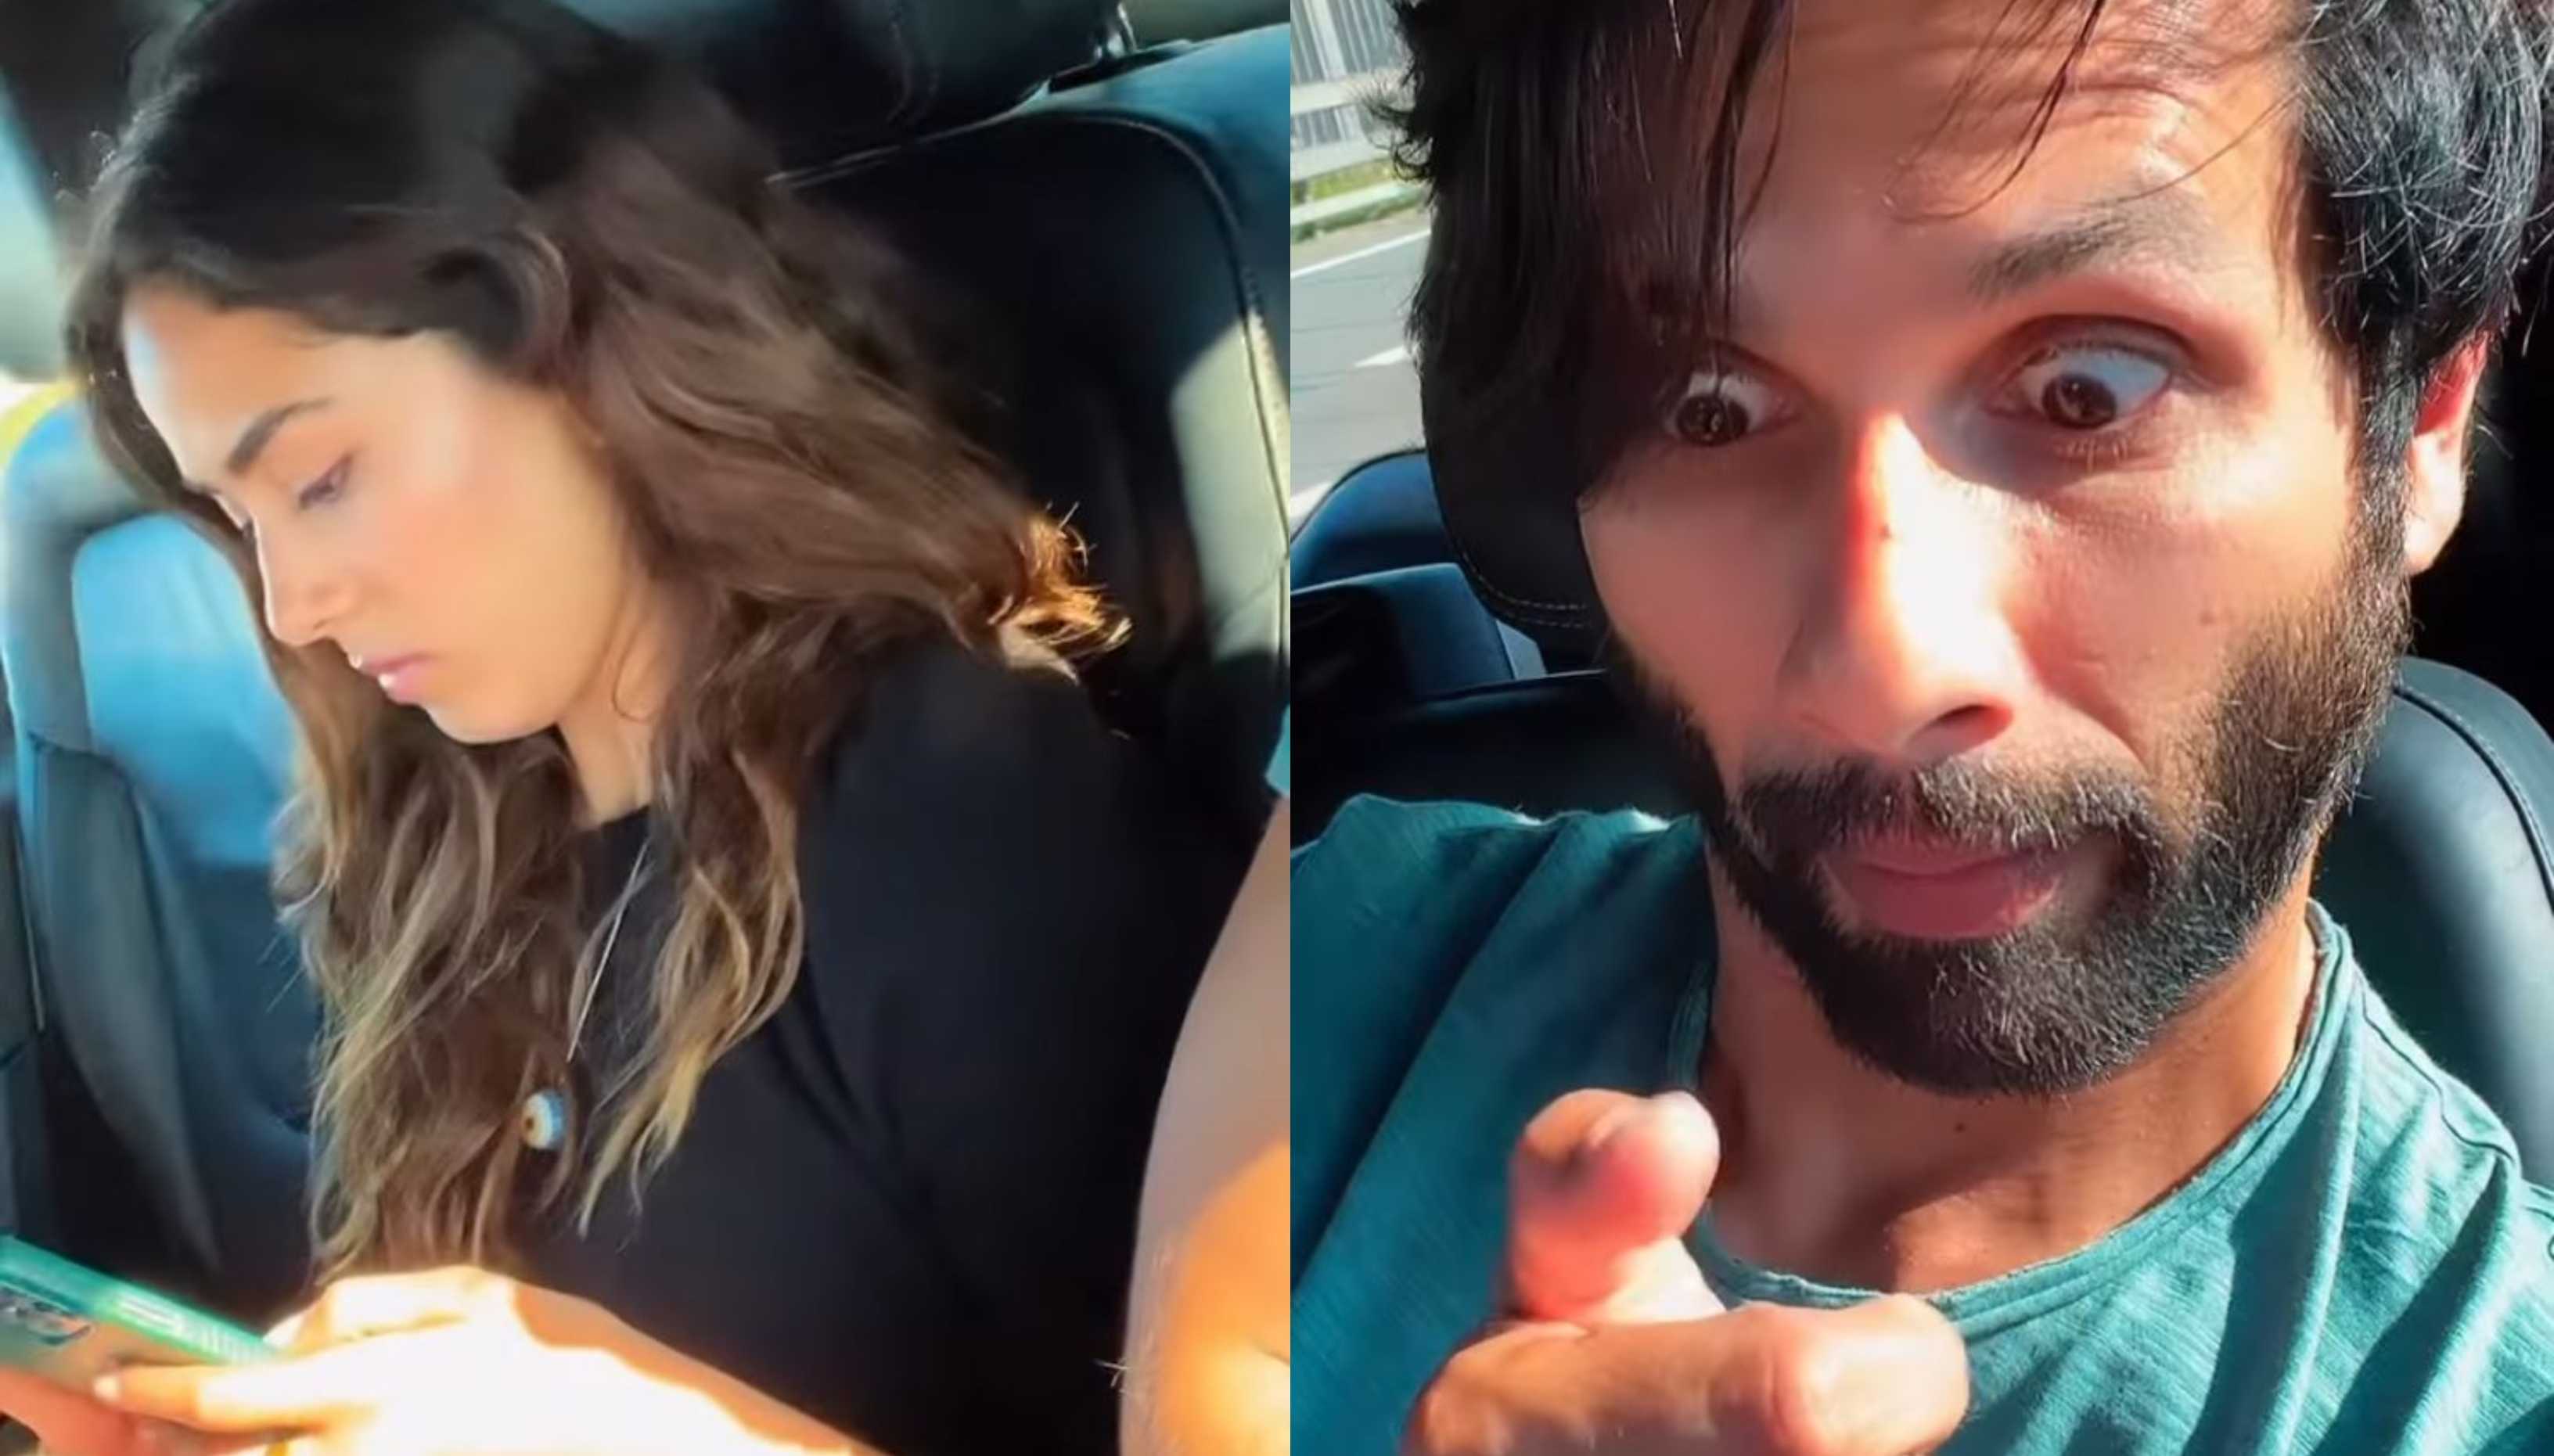 Shahid Kapoor hilariously mimics wife Mira Rajput while she’s busy on her phone; watch